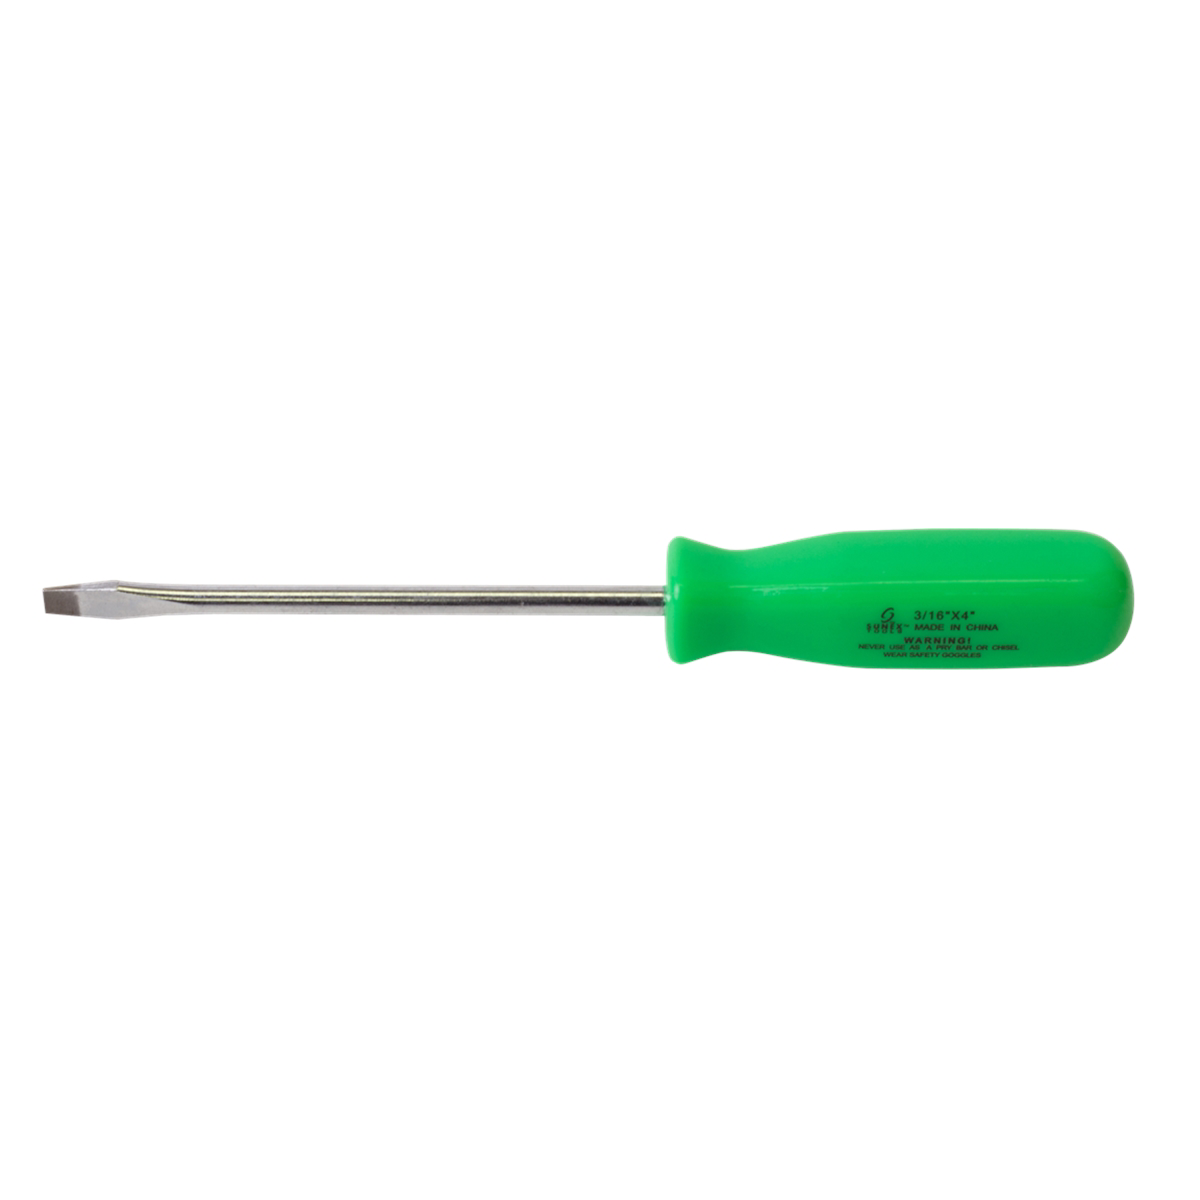 3/16" x 4" Slotted Screwdriver